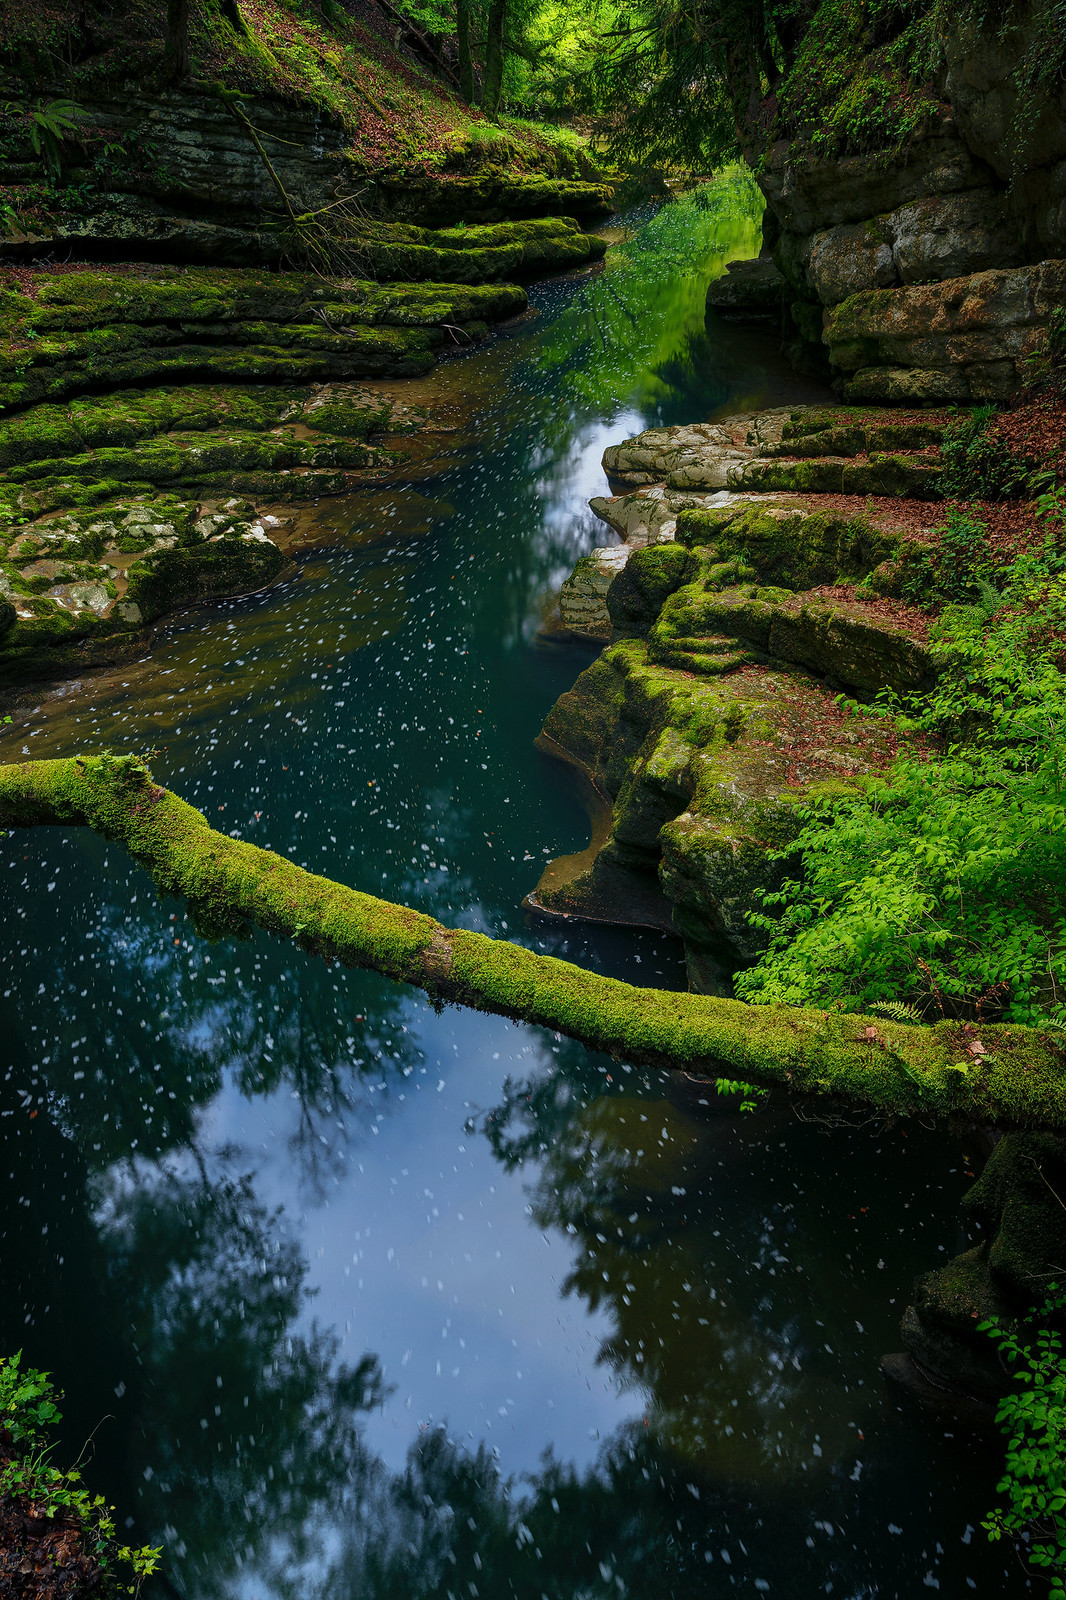 River in the green - Gorges de l'areuse